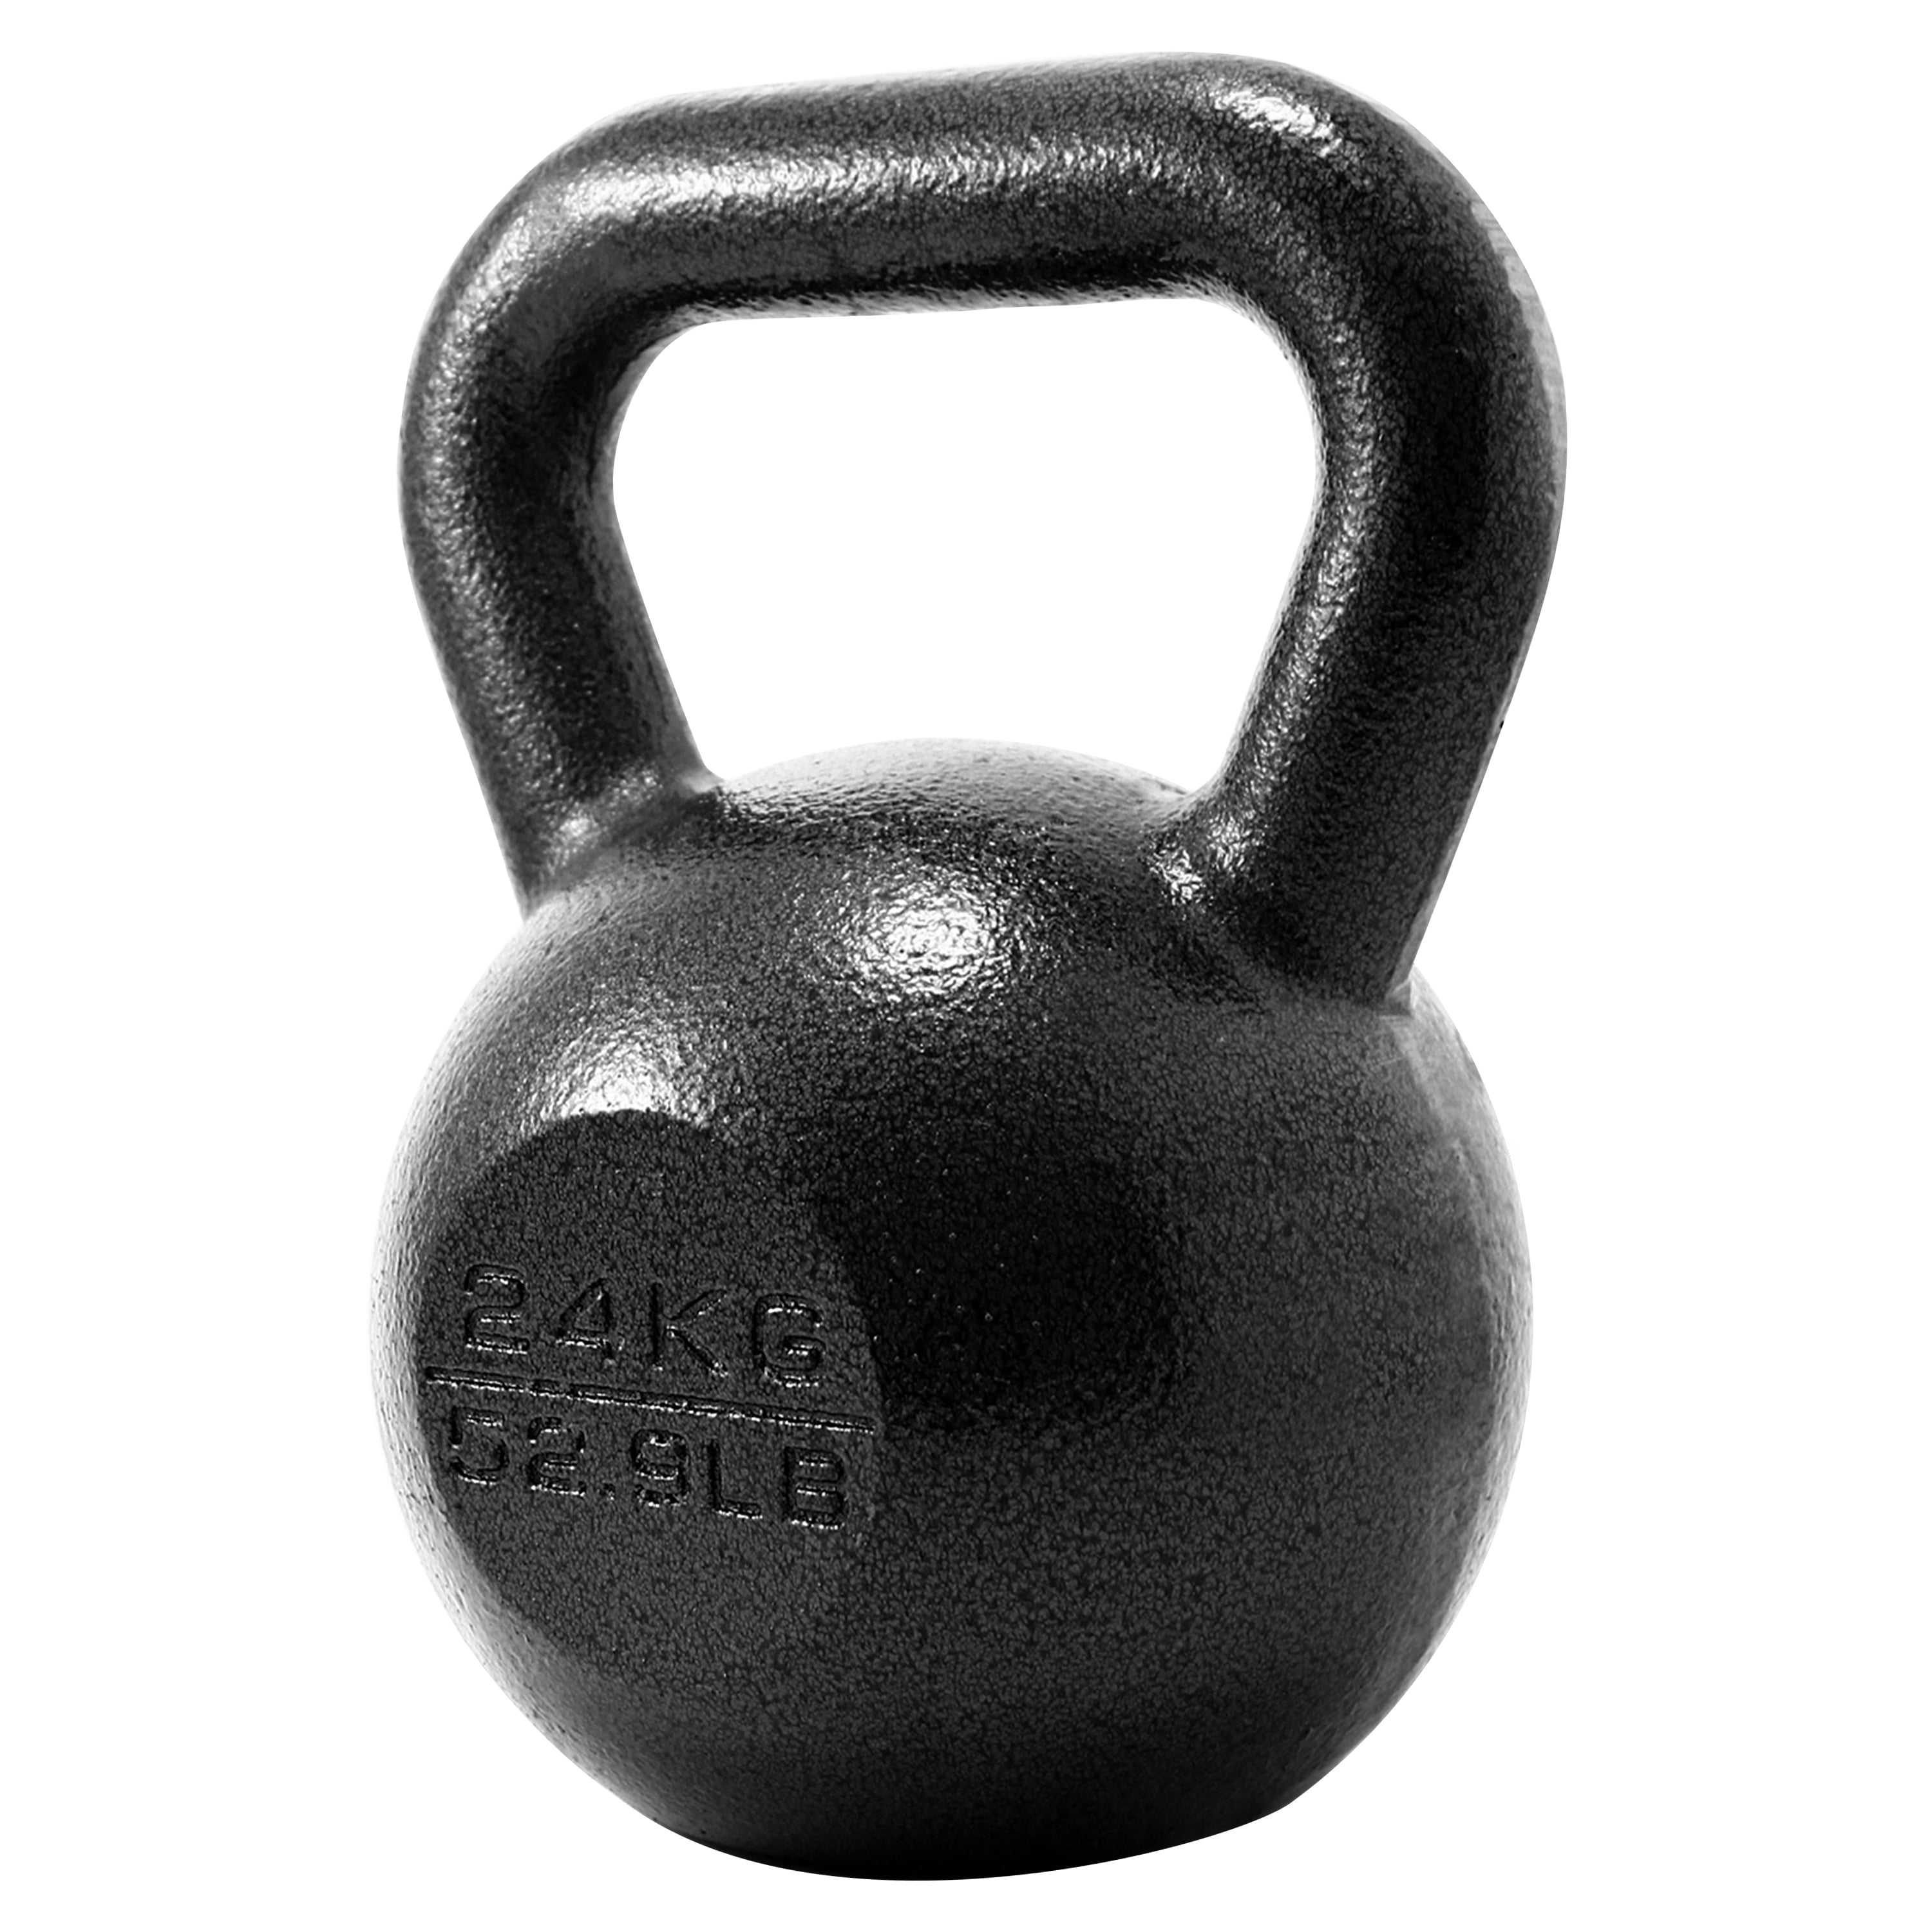 Cast Iron 24kg KETTLEBELL for Weight Lifting and WorkoutsHOME GYM EQUIPMENT 